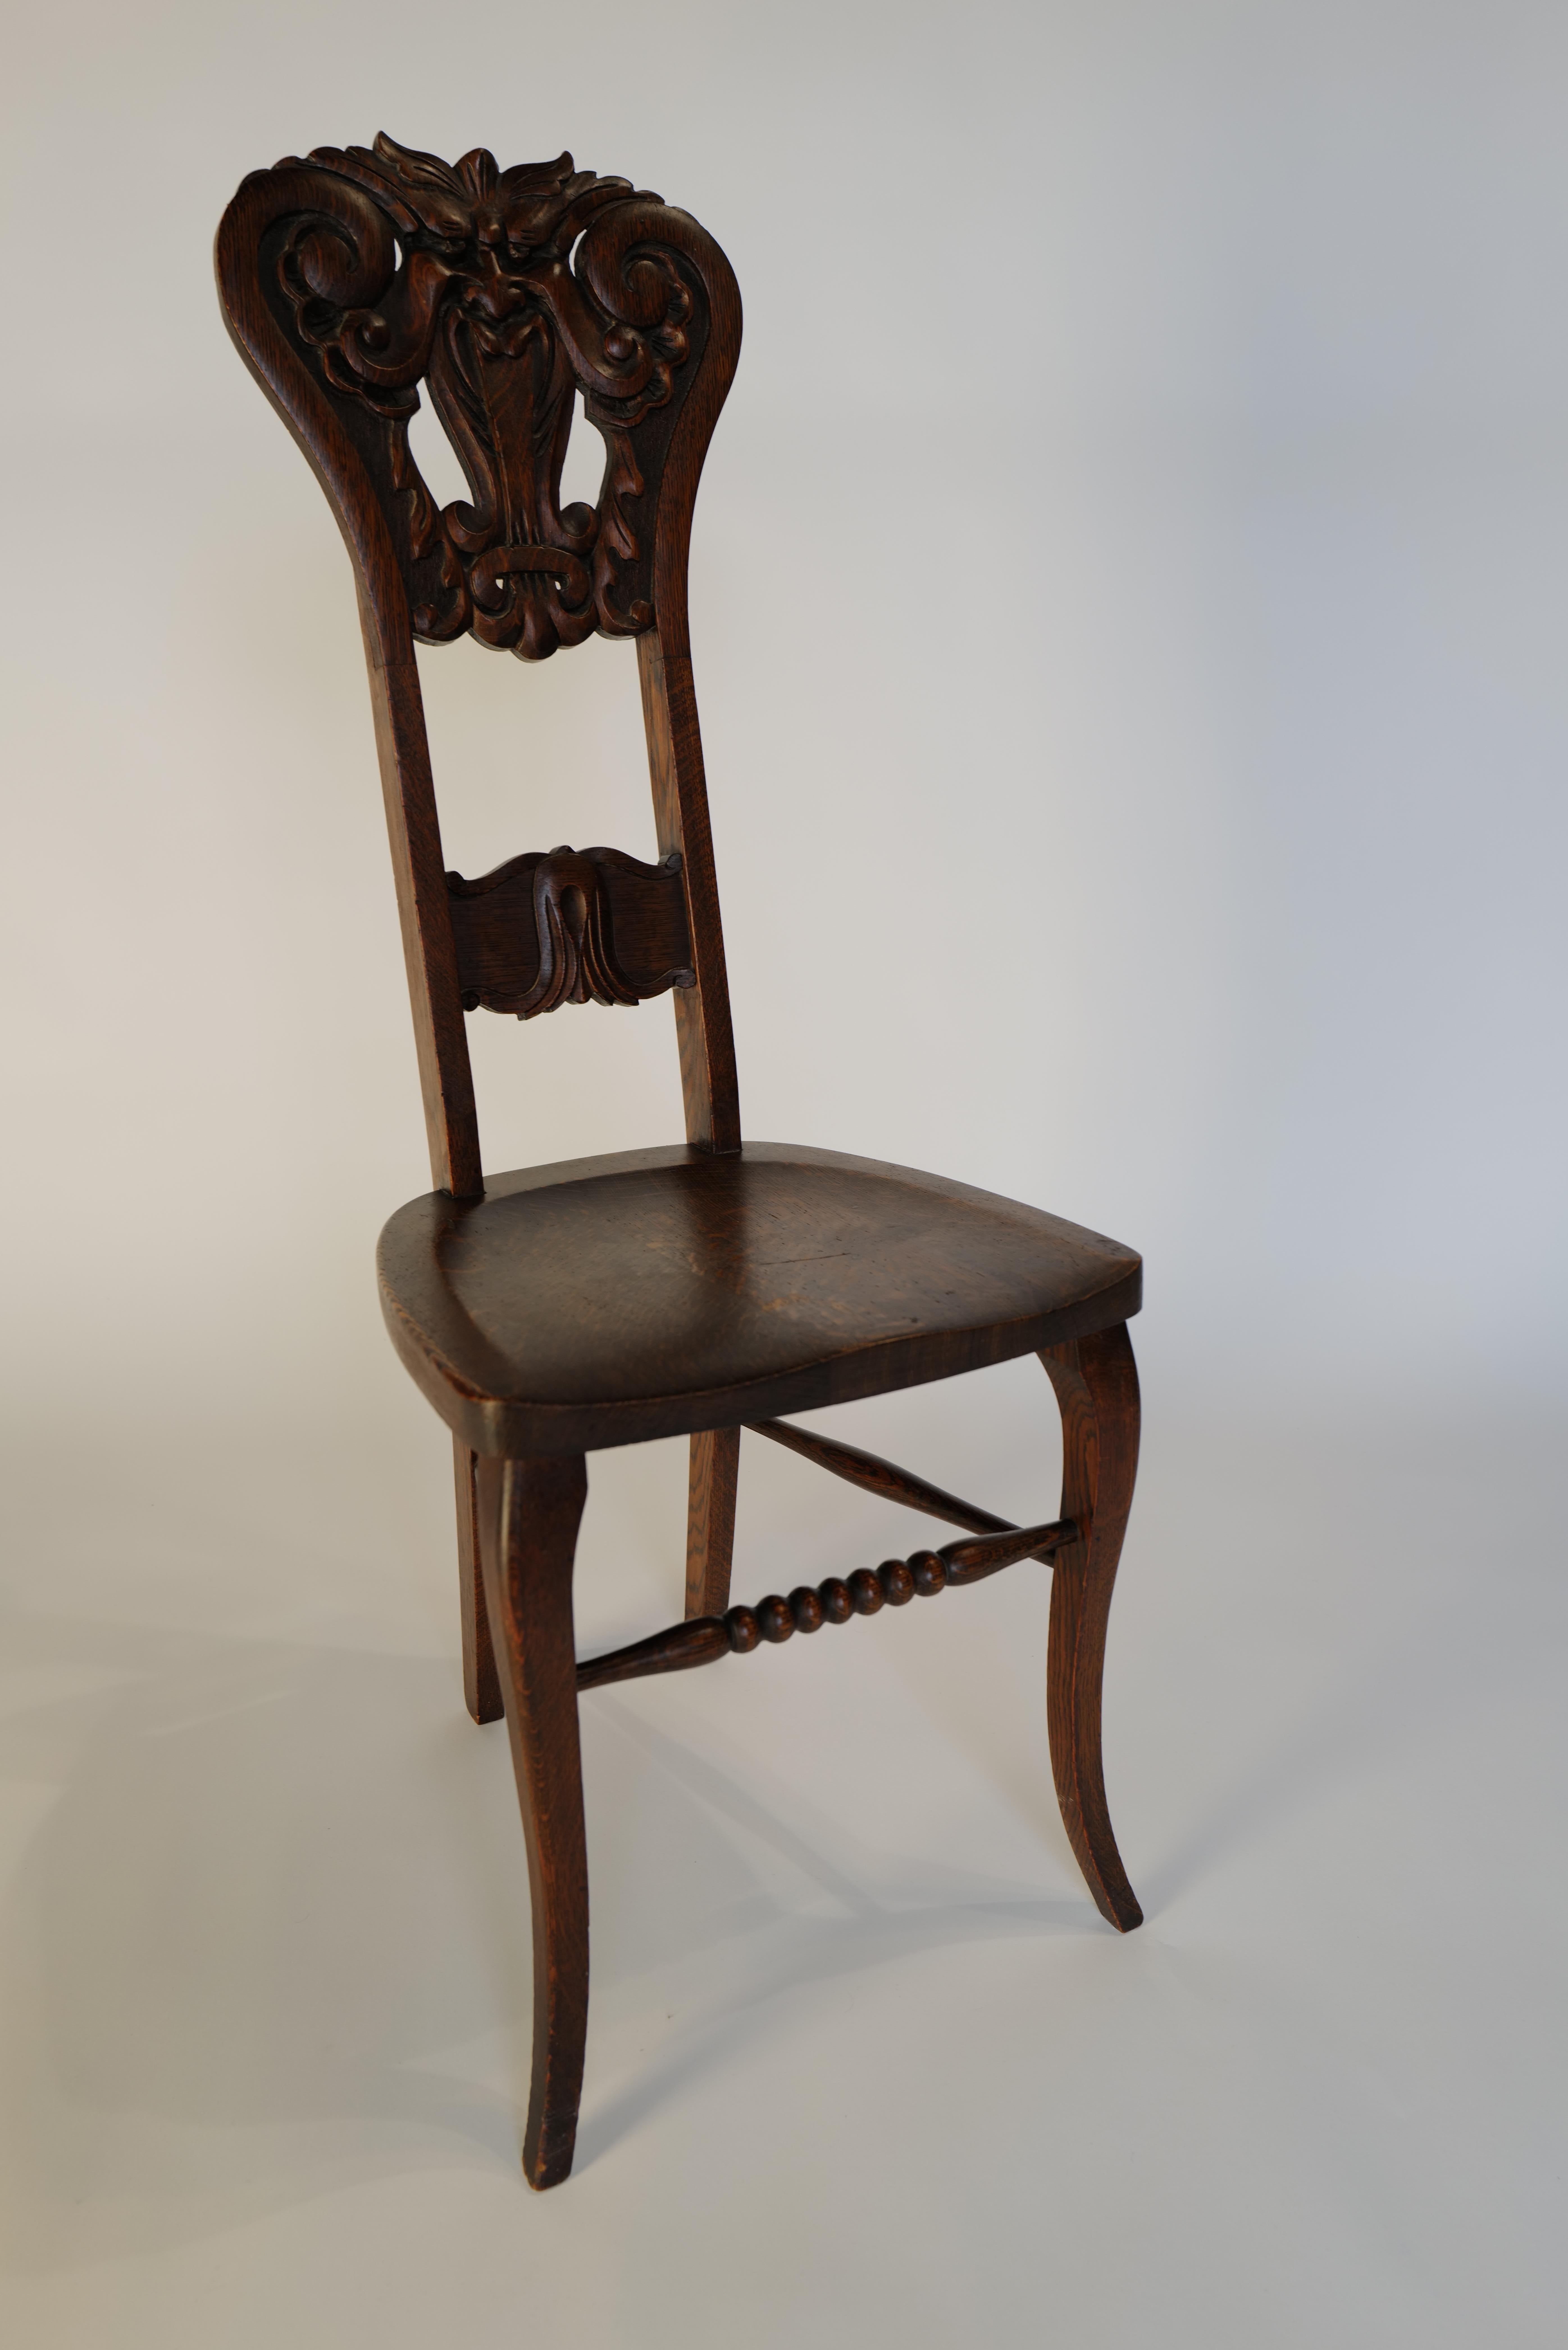 Whimsical Black Forest North Wind style carved face chair. Turned wood and carved detail in tiger oak. A wonderful addition in any interior.